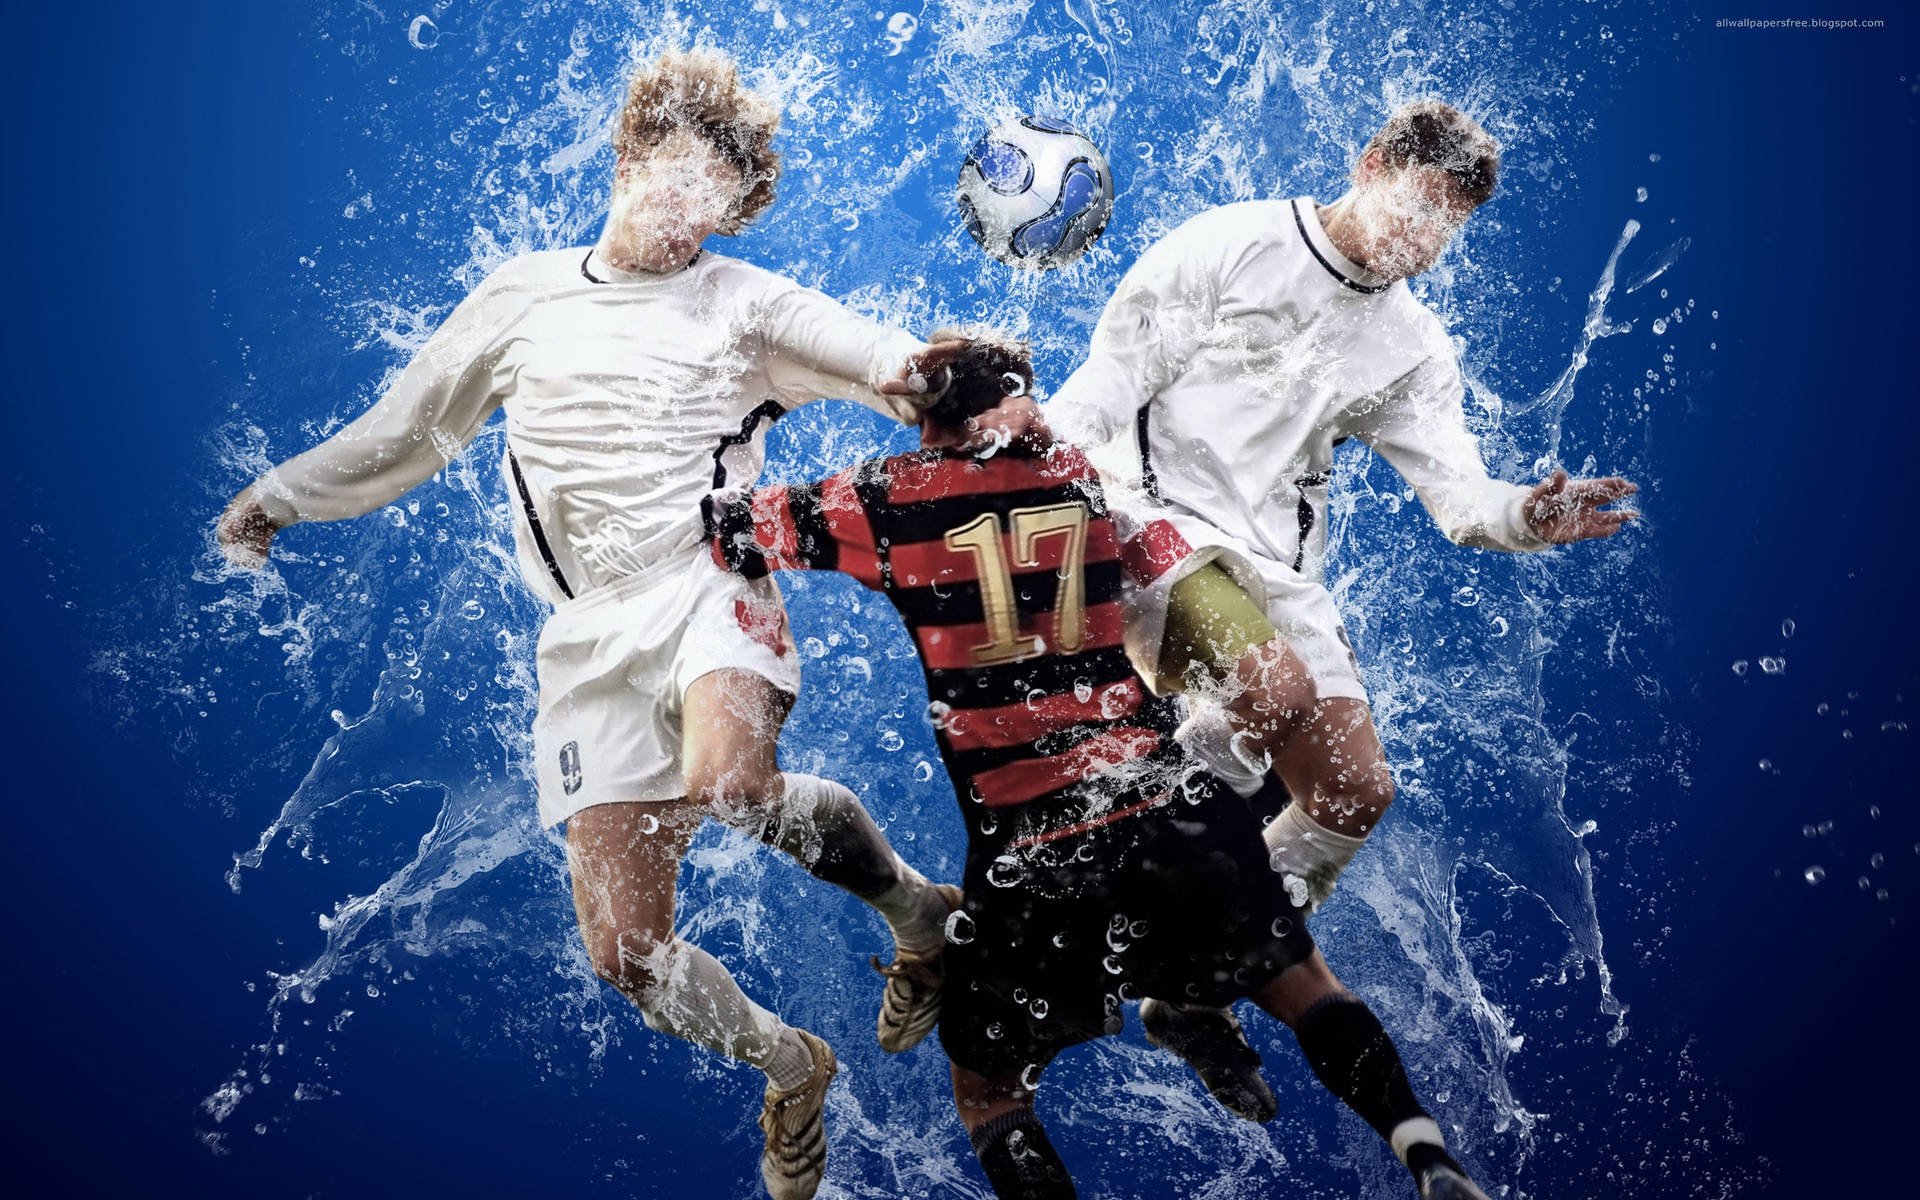 Cool Soccer Players Water Effect Wallpaper